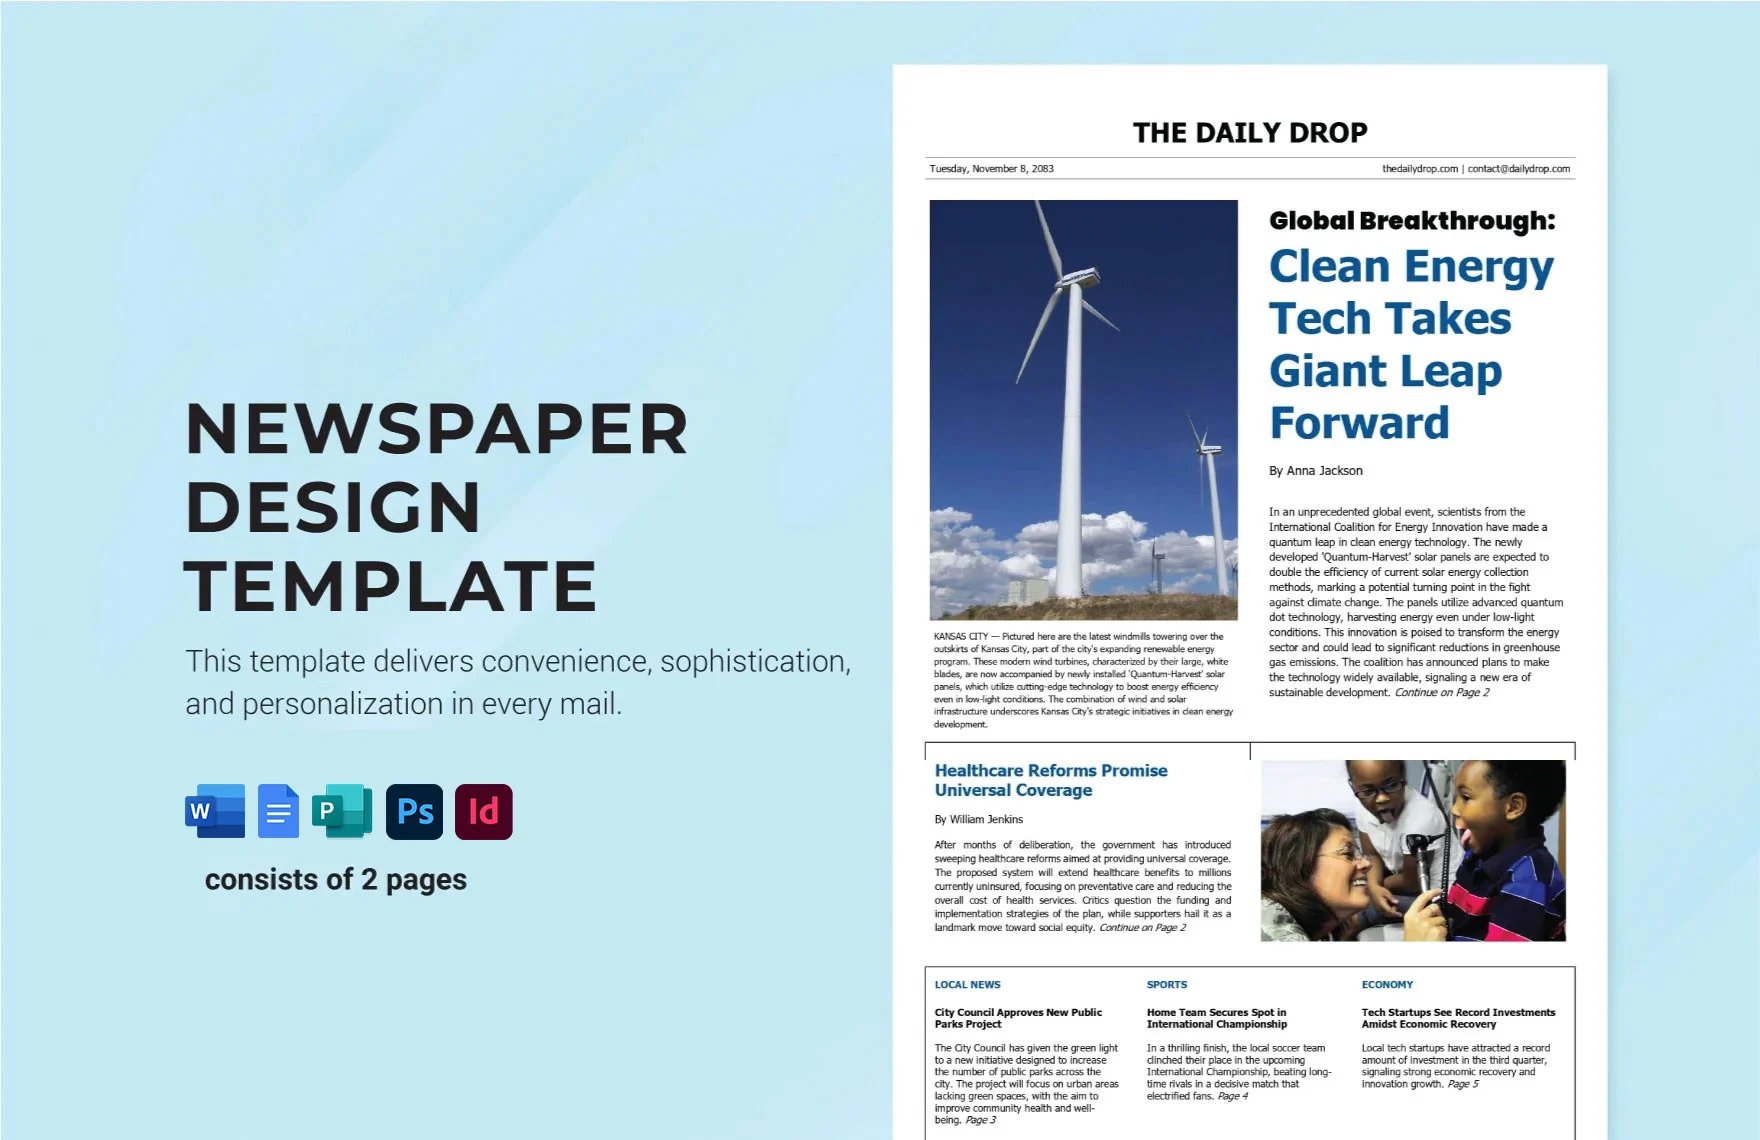 Free Newspaper Design Template in Word, Google Docs, PSD, Publisher, InDesign